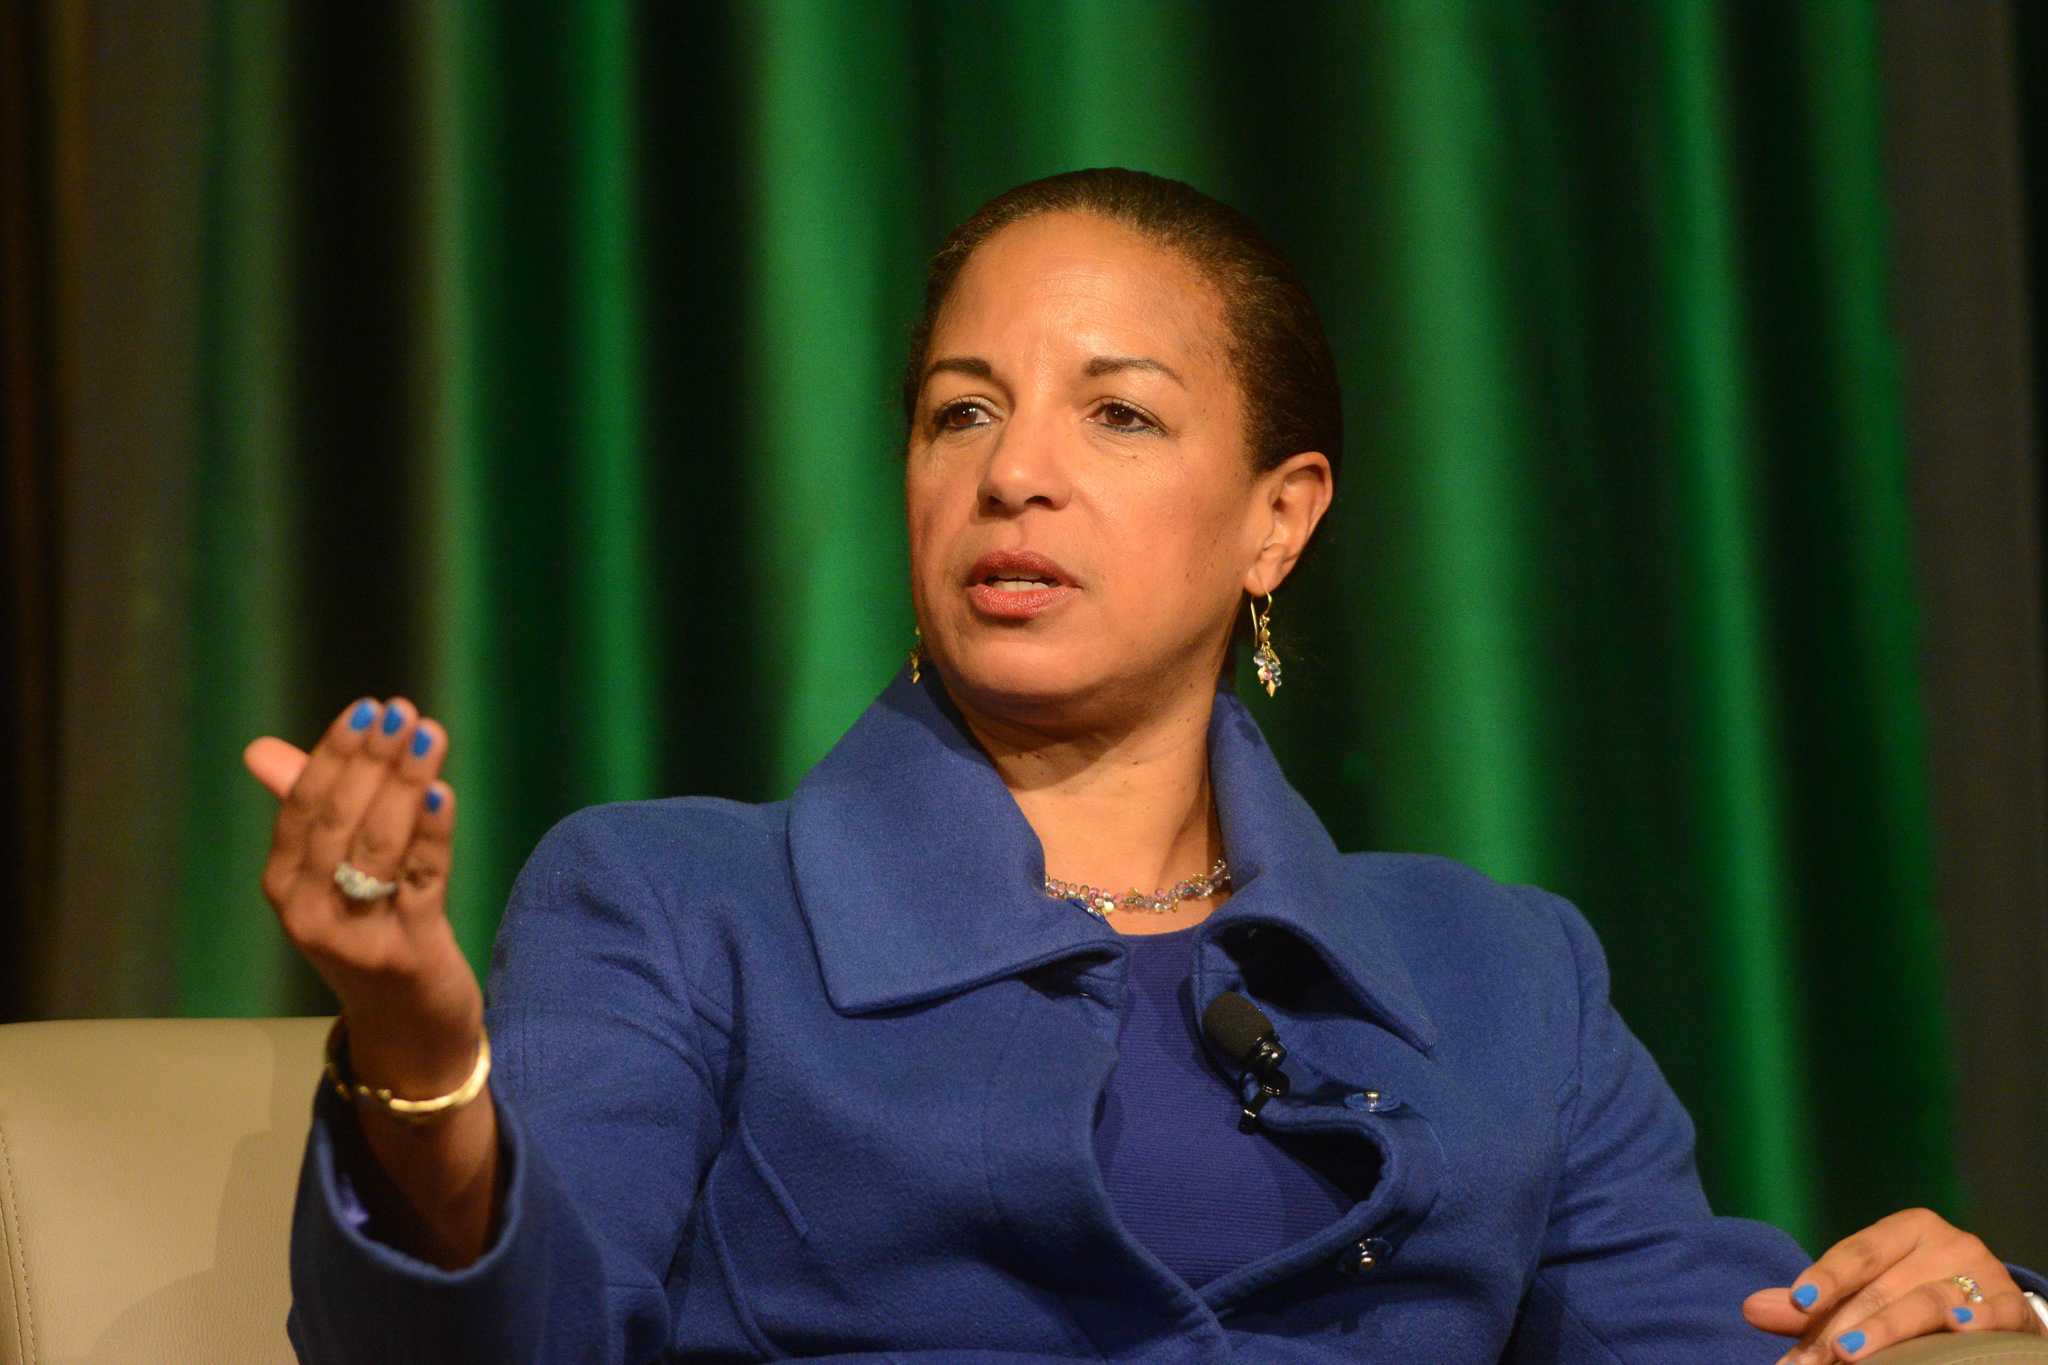 Susan Rice lectures on family history, lessons from ...